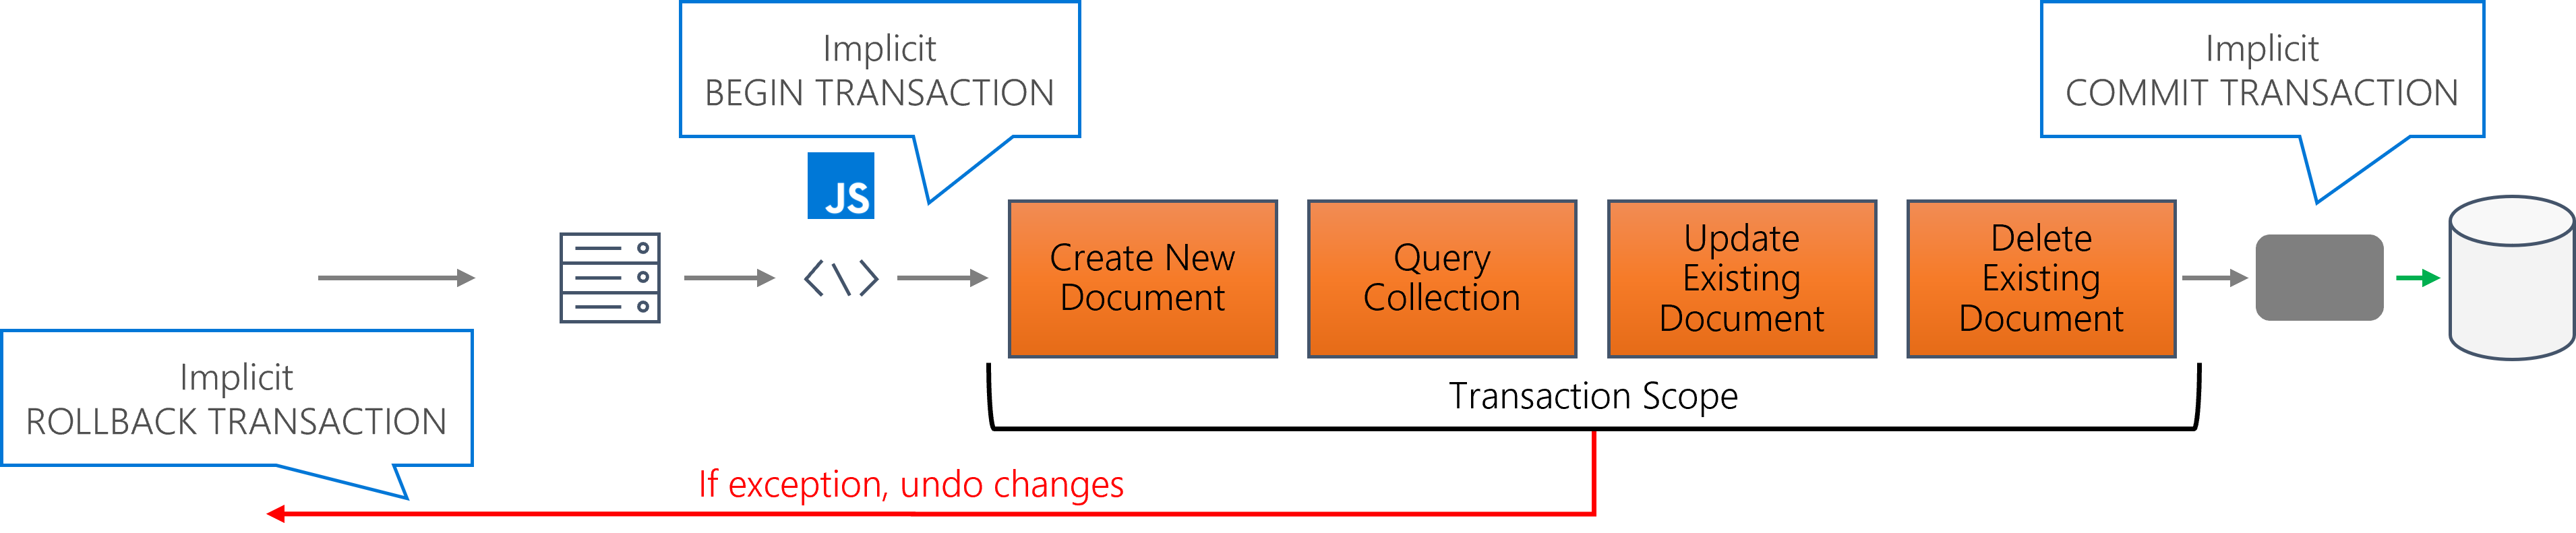 Illustration of the begin and commit of an implicit transaction using a JavaScript stored procedure